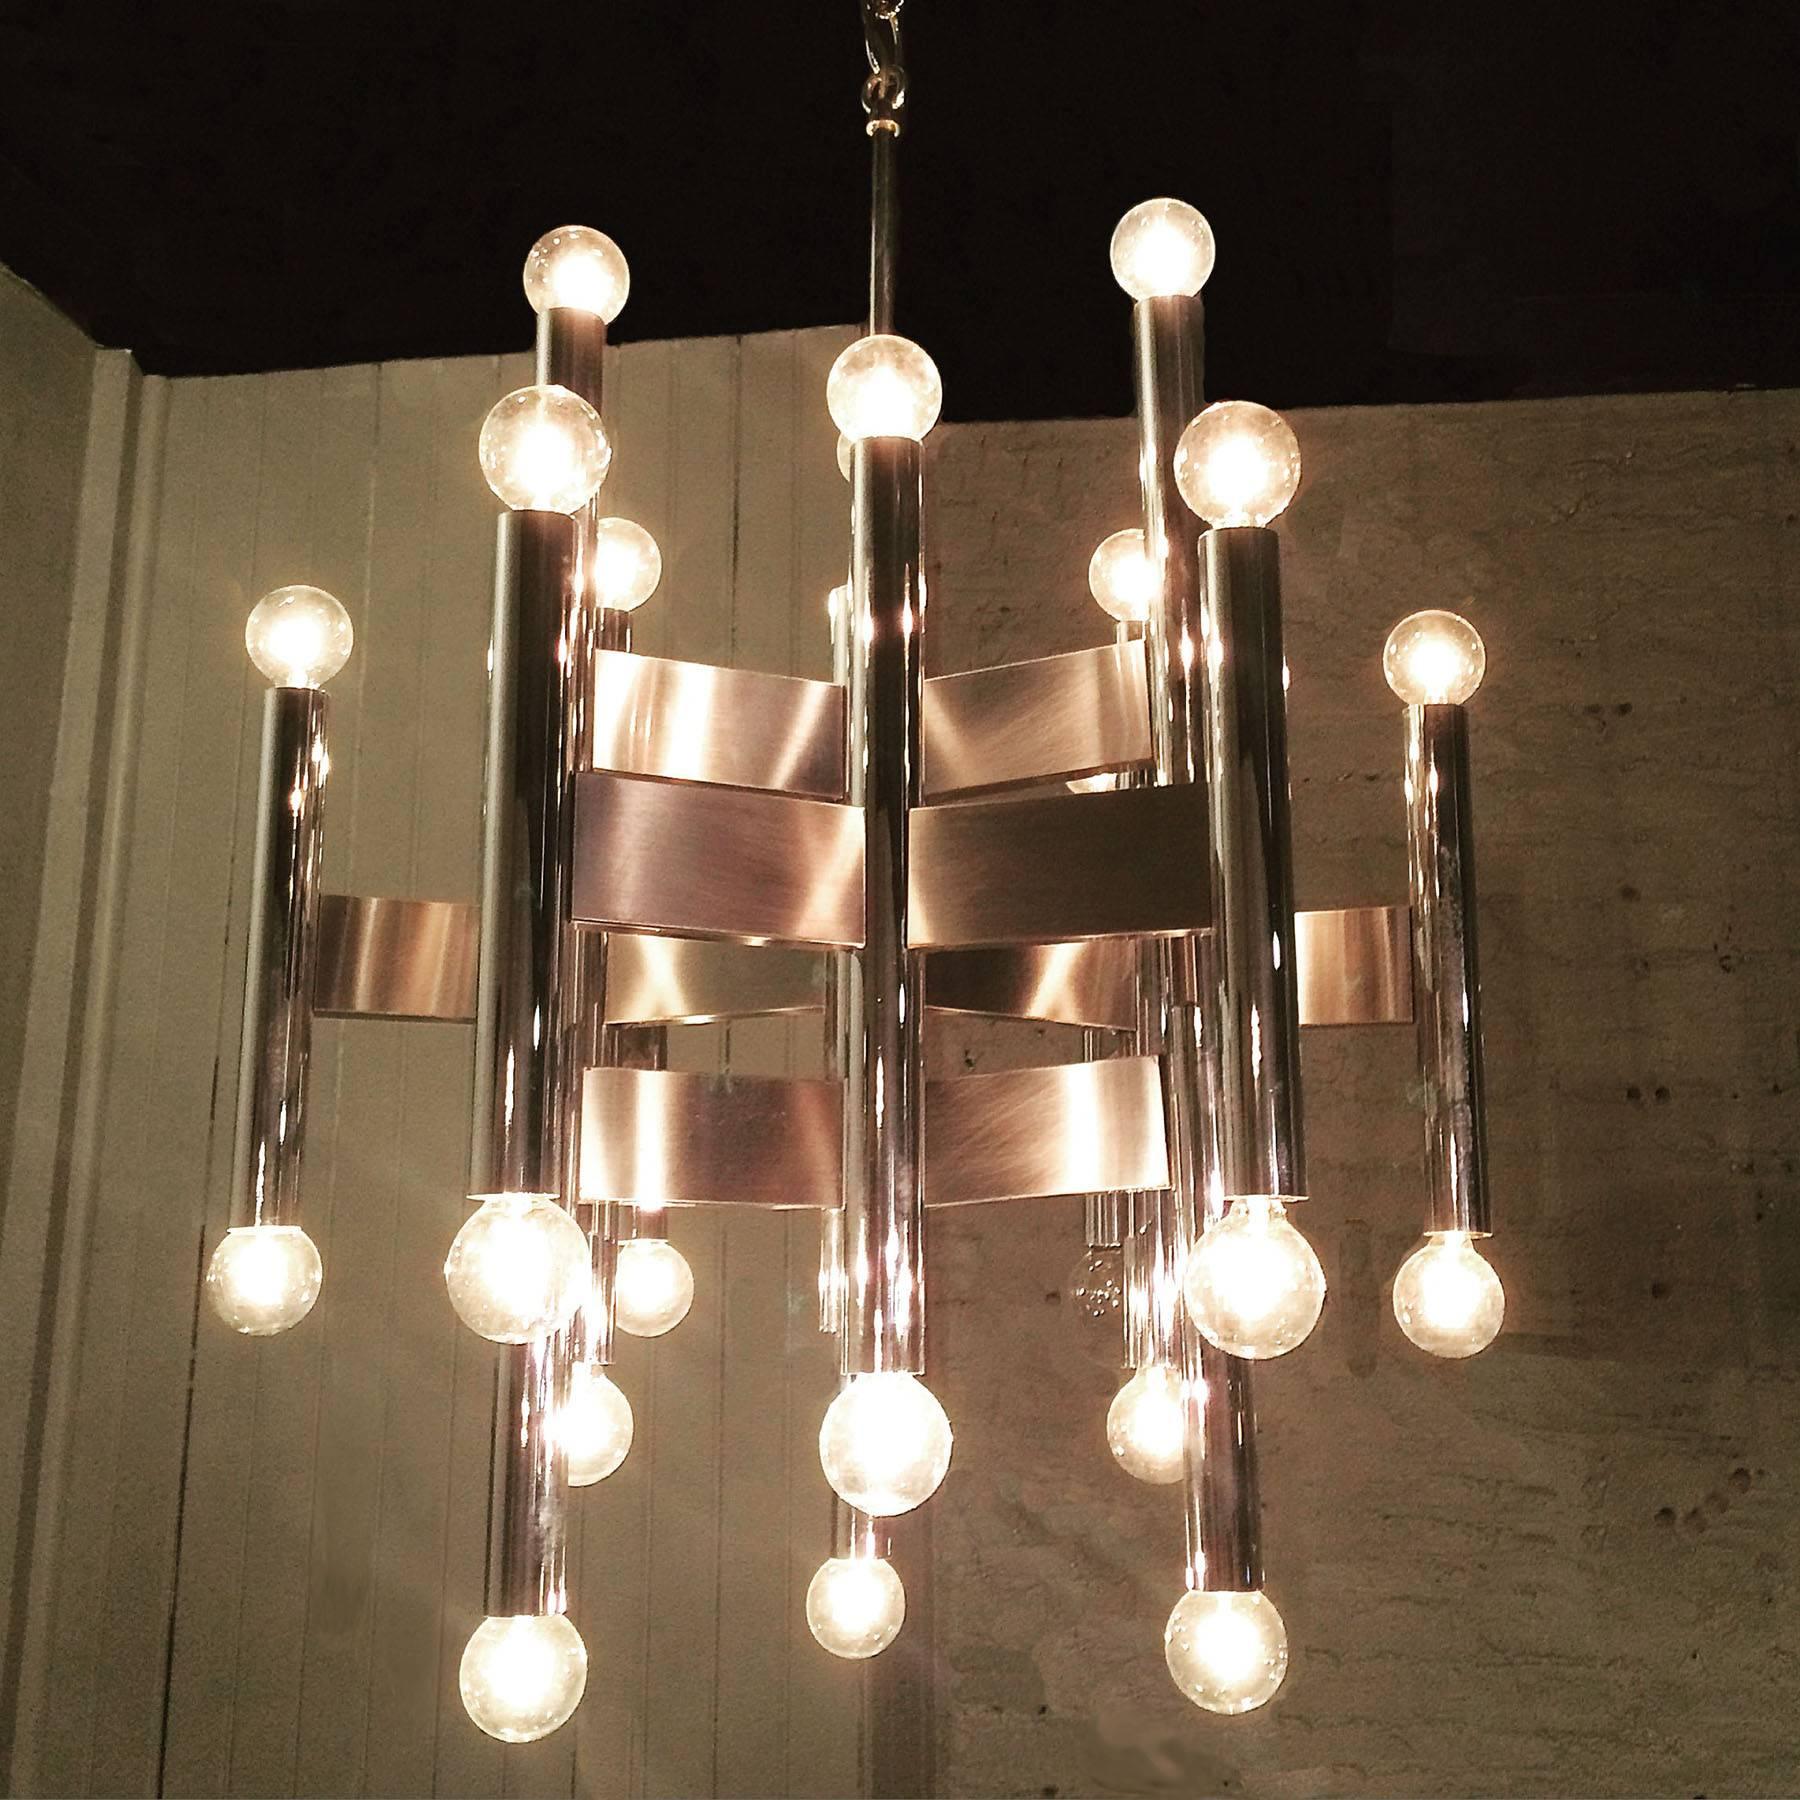 Italian modernist chrome chandelier attributed to Gaetano Sciolari has alternating tubular stems connected by flat panels.

The fixture is 18.5in diameter x 25.5in height, overall height with chain is 32in.